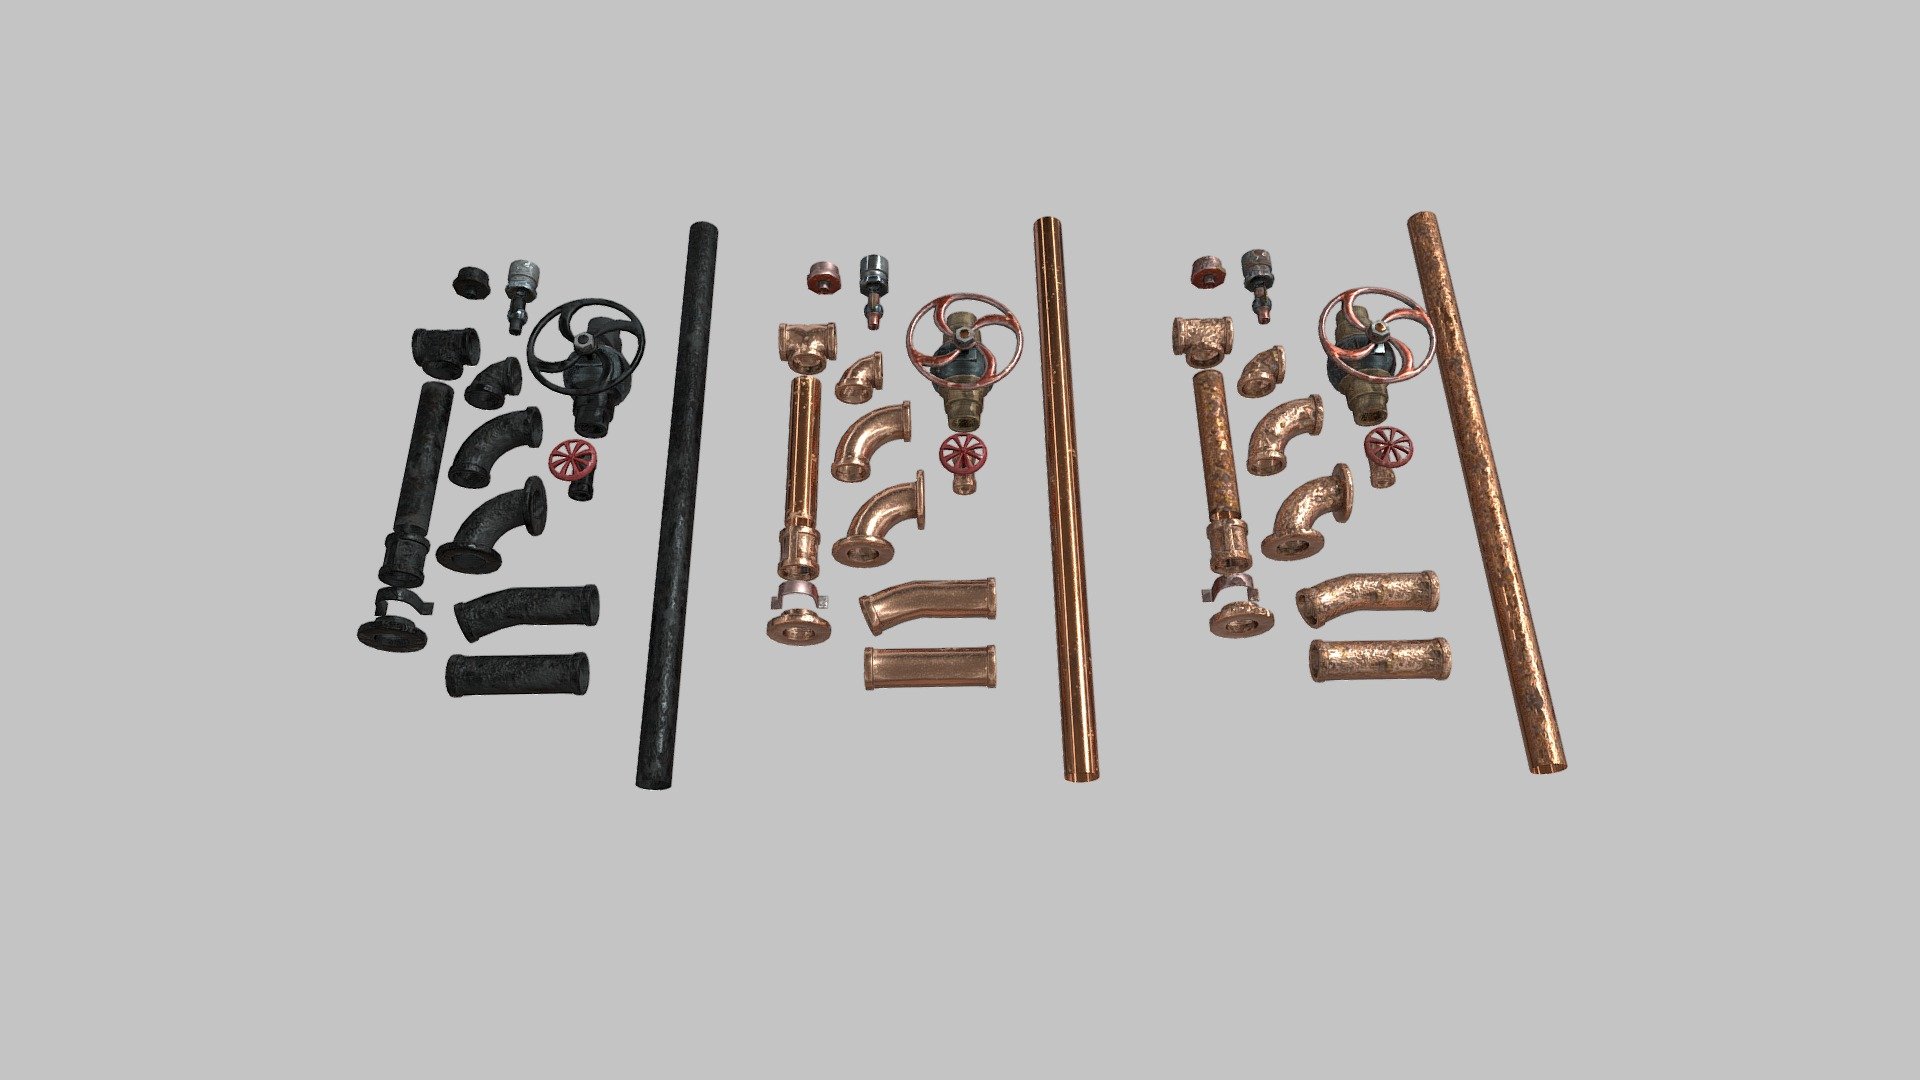 Three variants of steampunk pipes and valves I made for my steampunk scene:
https://www.artstation.com/artwork/N59Z5N

The free download includes a FBX file and 1K / 2K texture sets 3d model